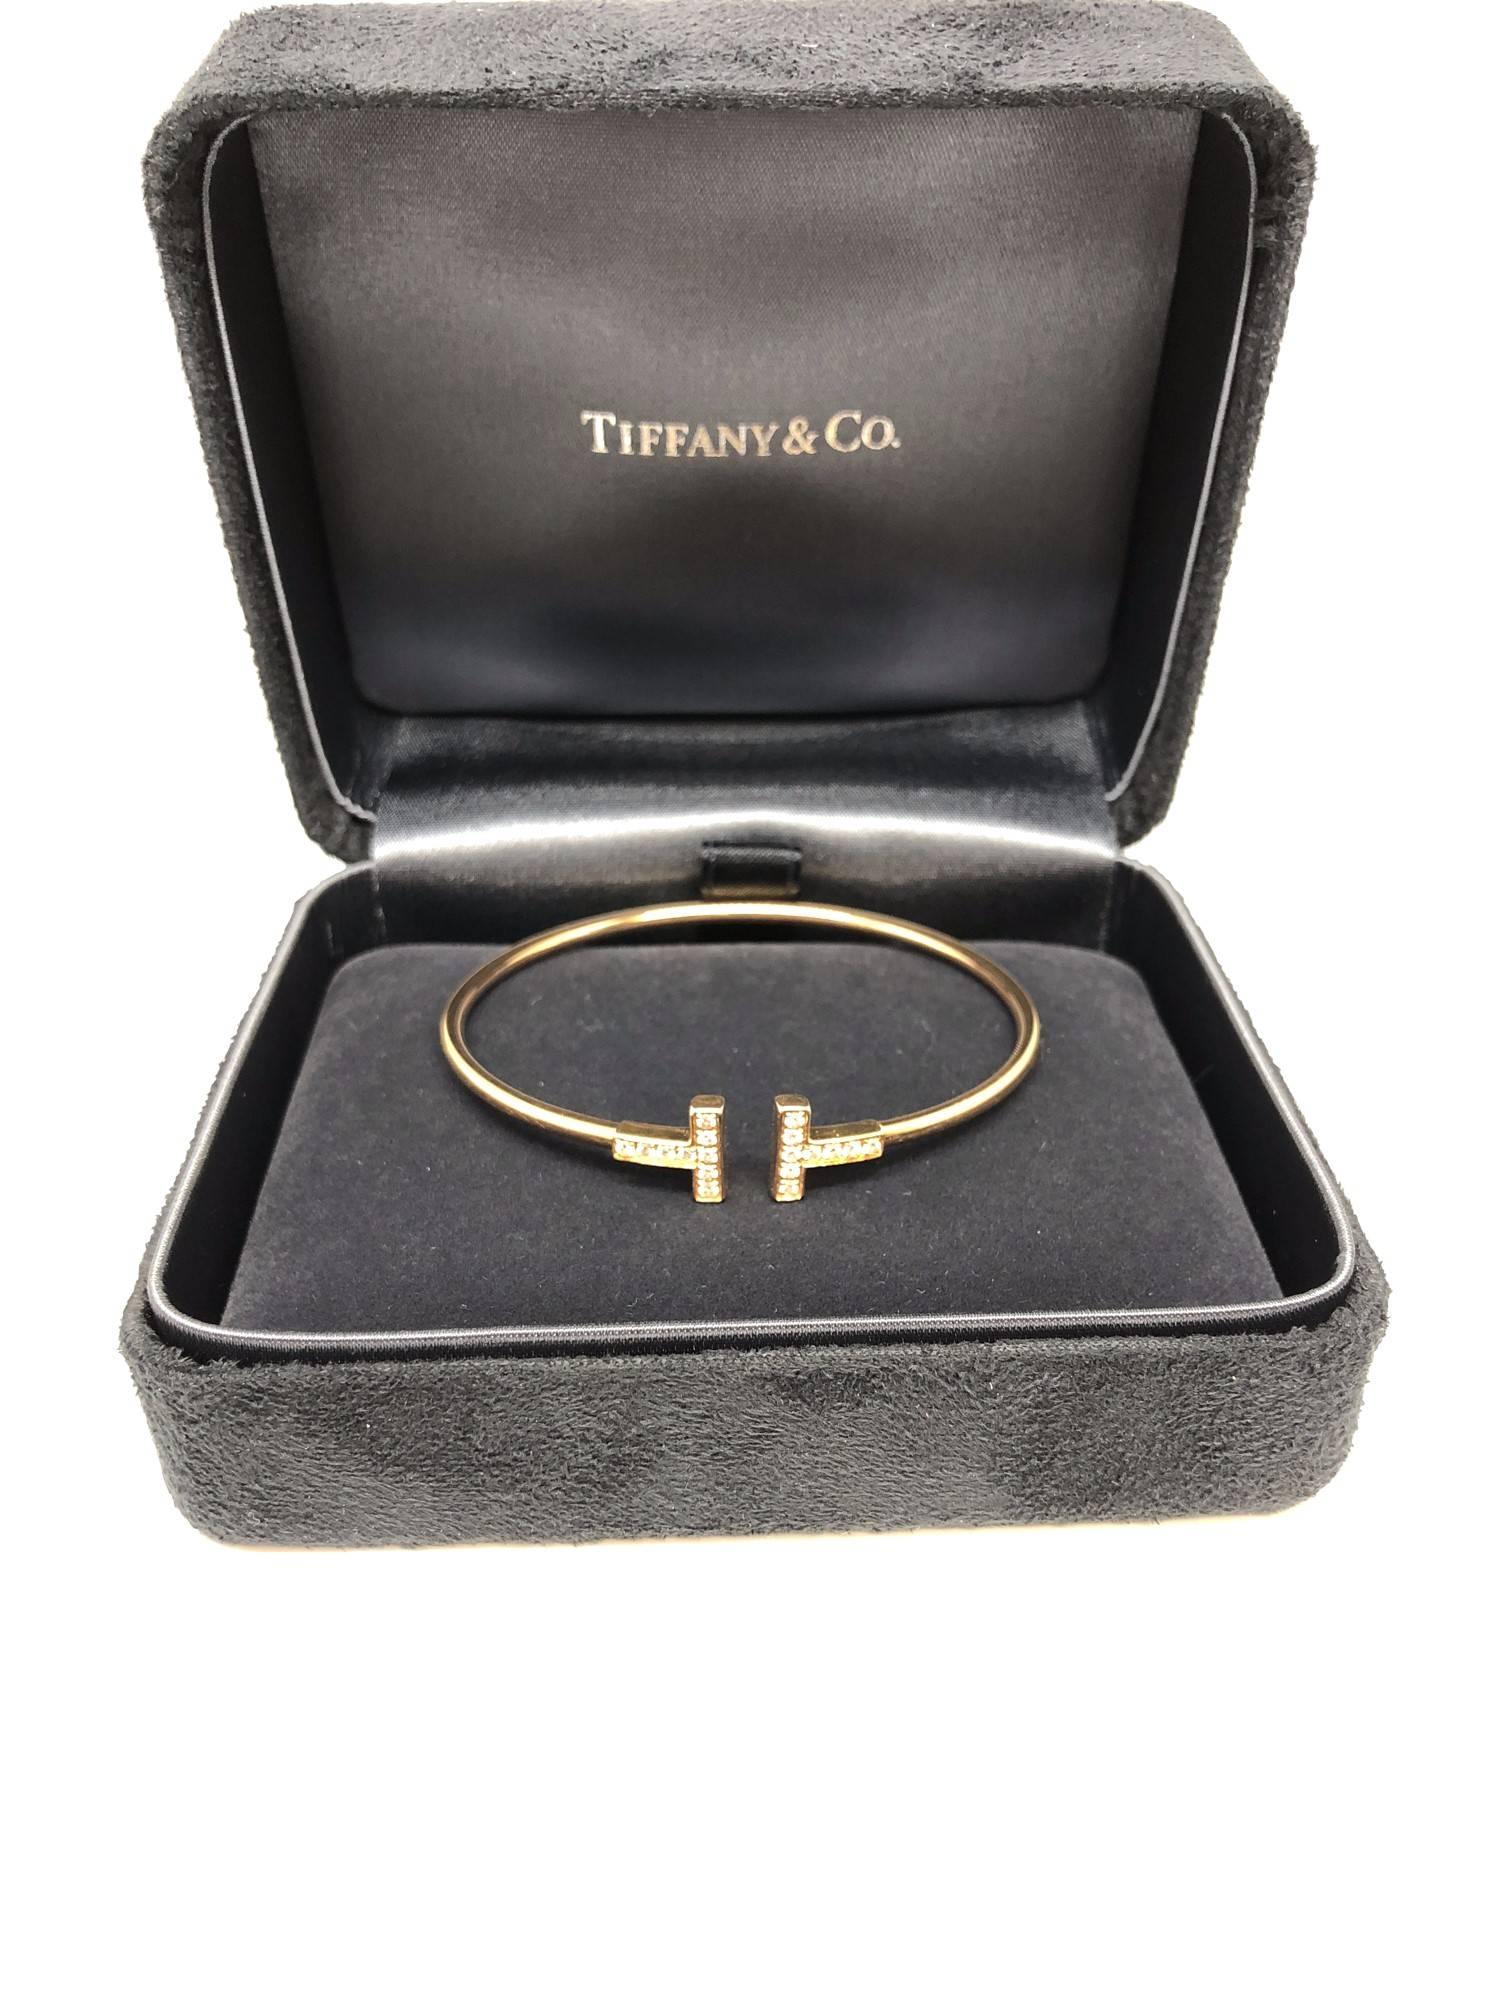 Tiffany & Co. iconic T design bracelet, the T housing brilliant round diamonds. The slim 18k gold band is made to flex and bend back into shape after slipping on the wrist. 

Inspired by New York architecture, T designs are strong and dynamic just